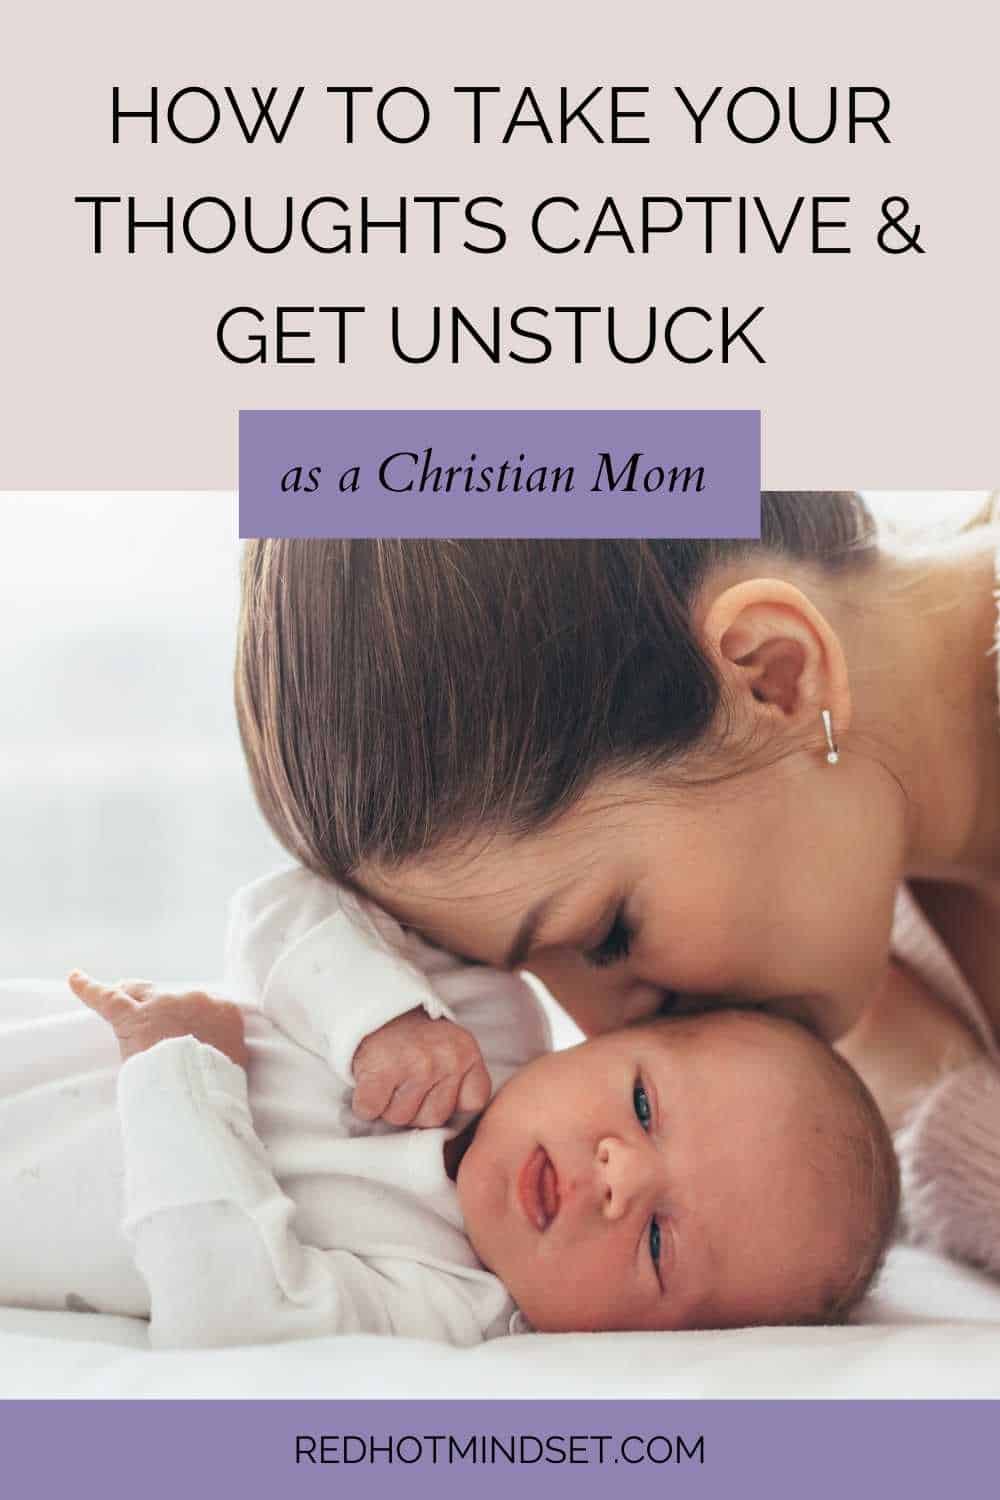 Picture of mom kissing her baby with title How to take thoughts captive and get unstuck as a christian mom